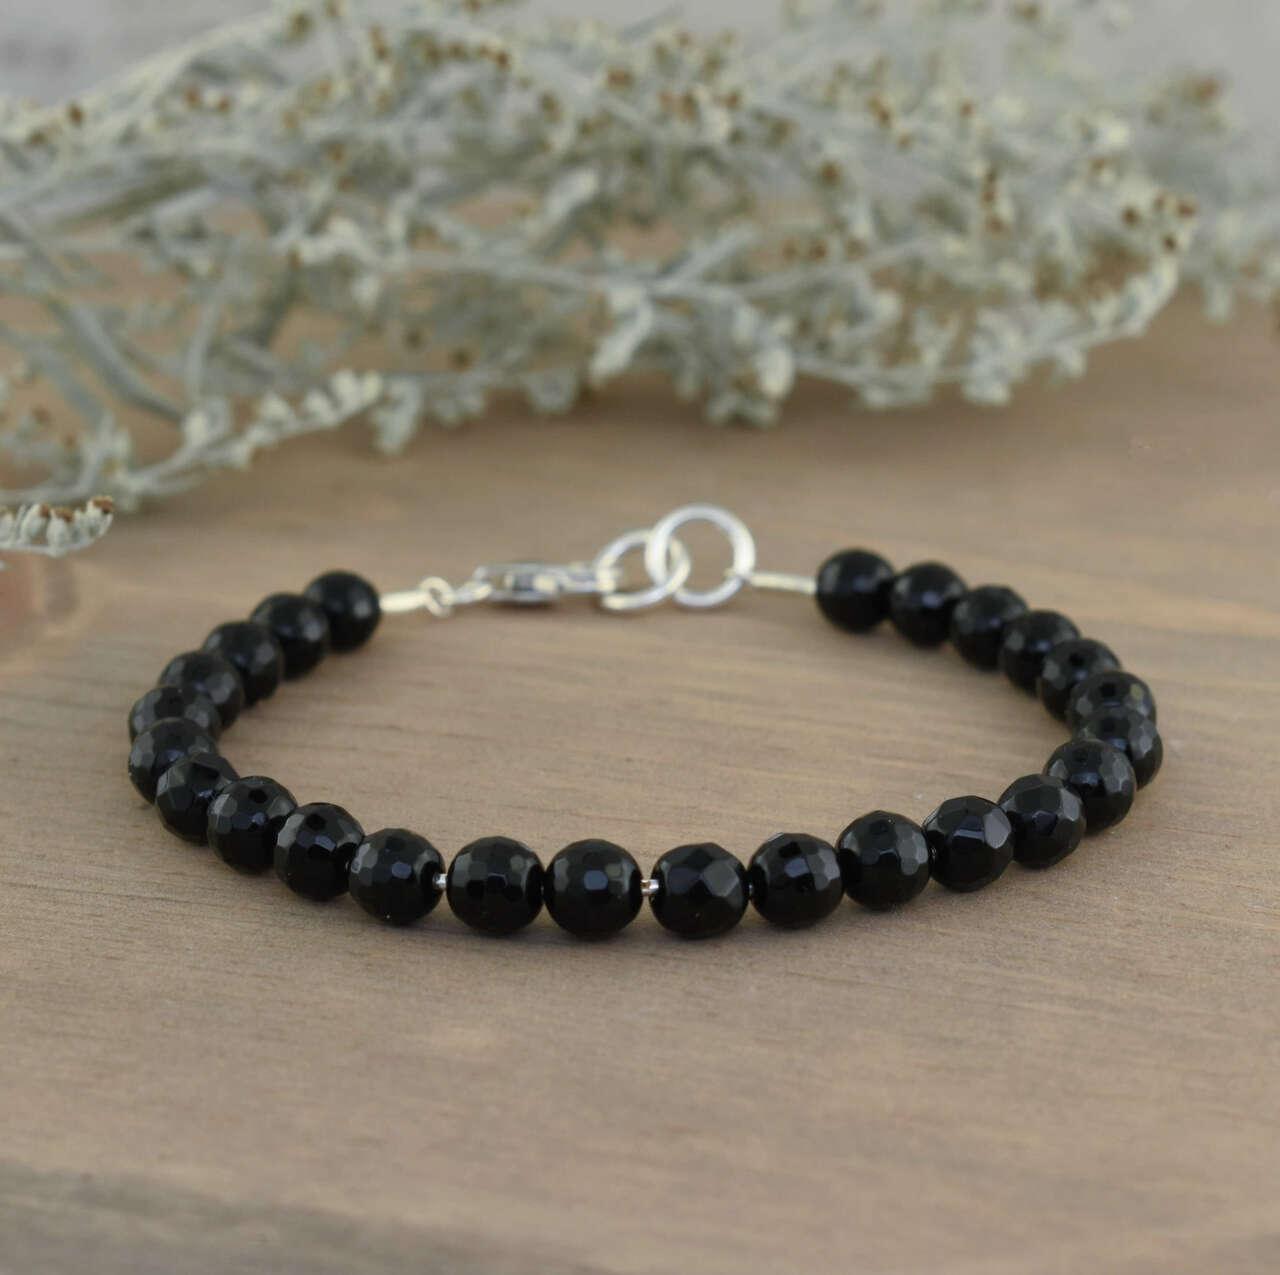 Put'n on the Glitz Bracelet in sterling silver and genuine onyx stones